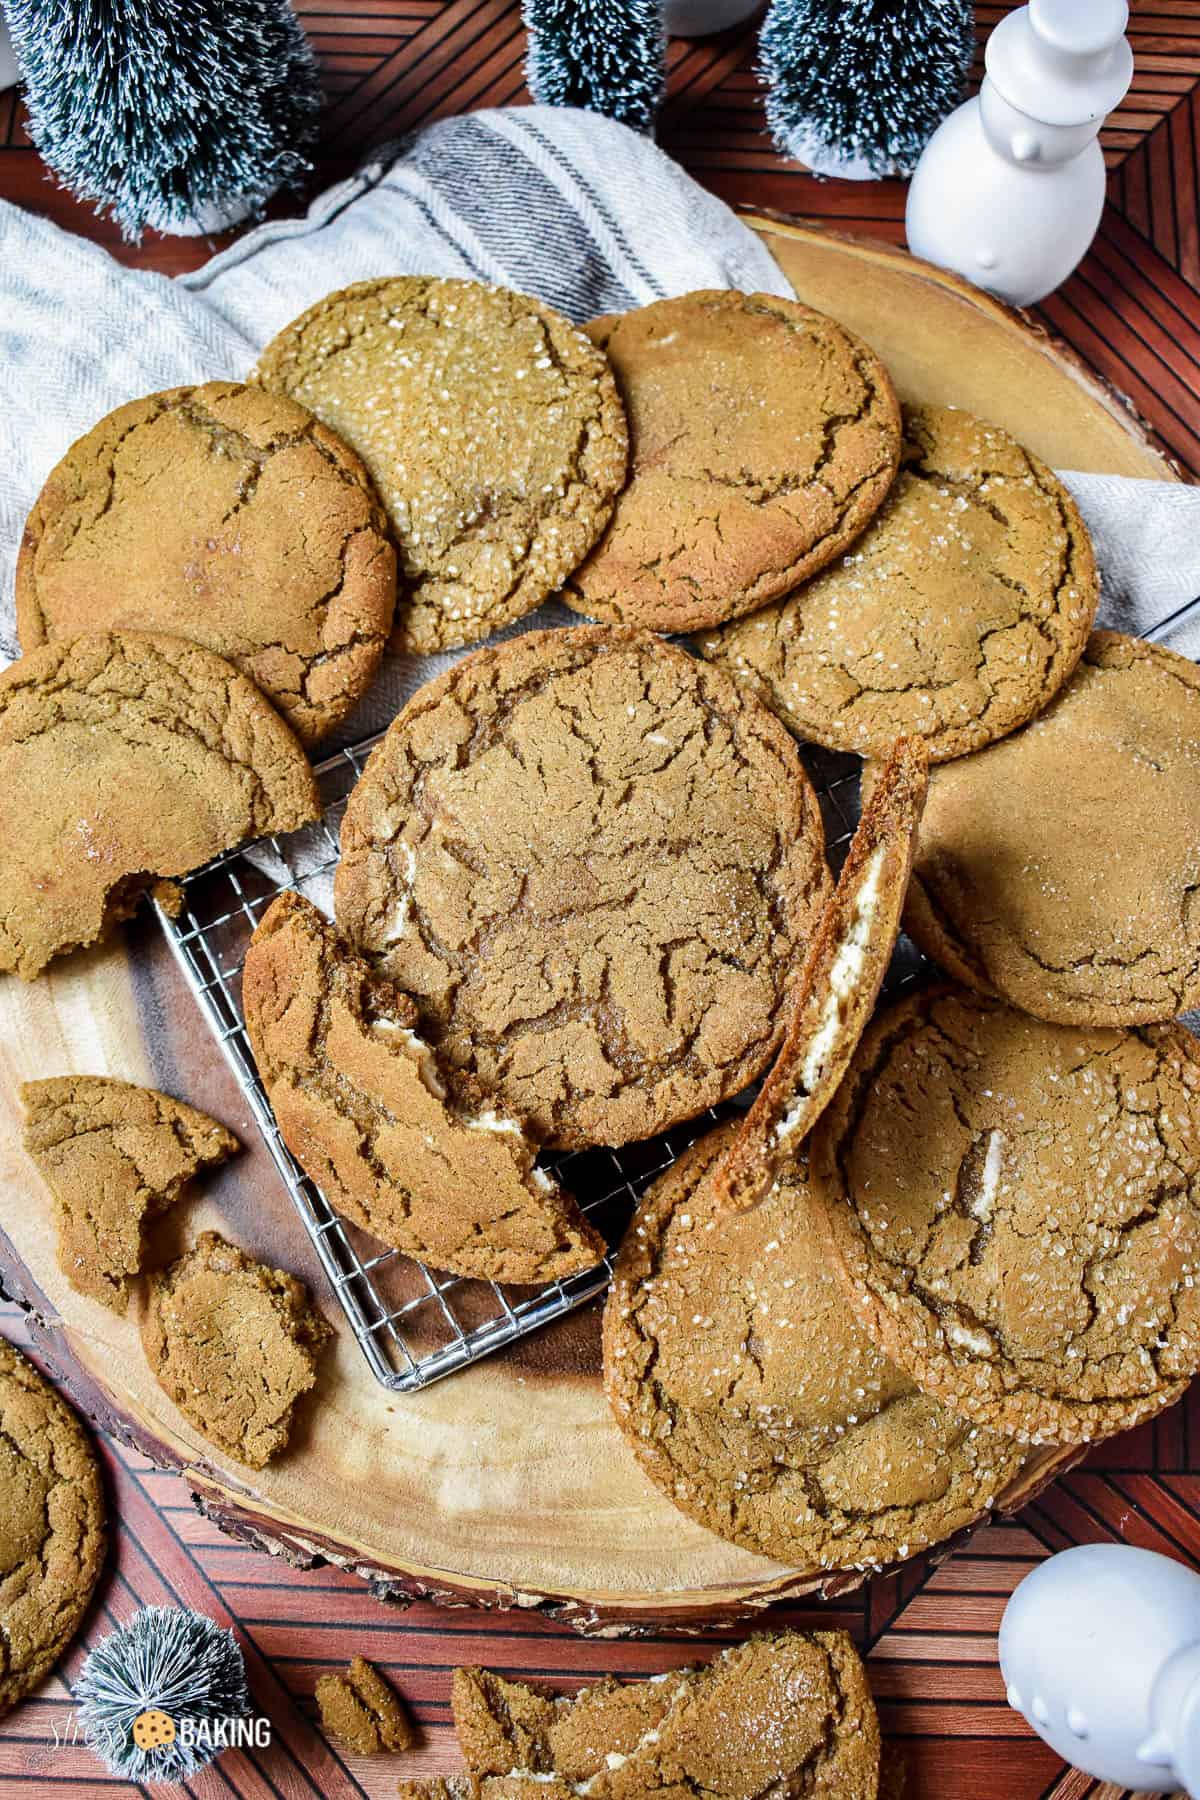 Gingerbread cookies with crinkly tops arranged in a circle on a wood platter with one cookie broken in half to show the cheesecake filling inside